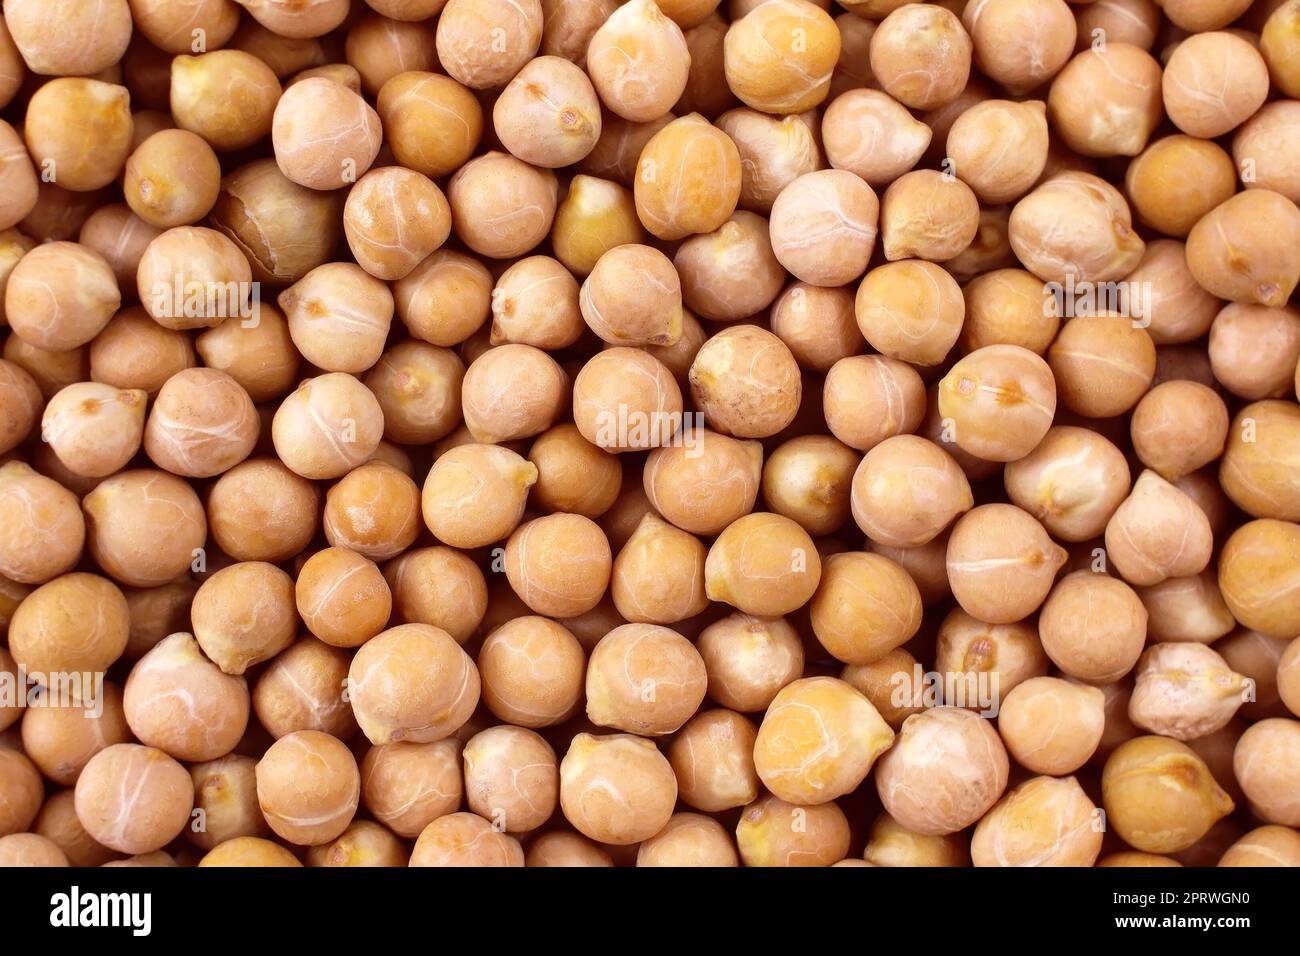 Top view of yellow dried chickpeas or chick peas texture close up. Stock Photo